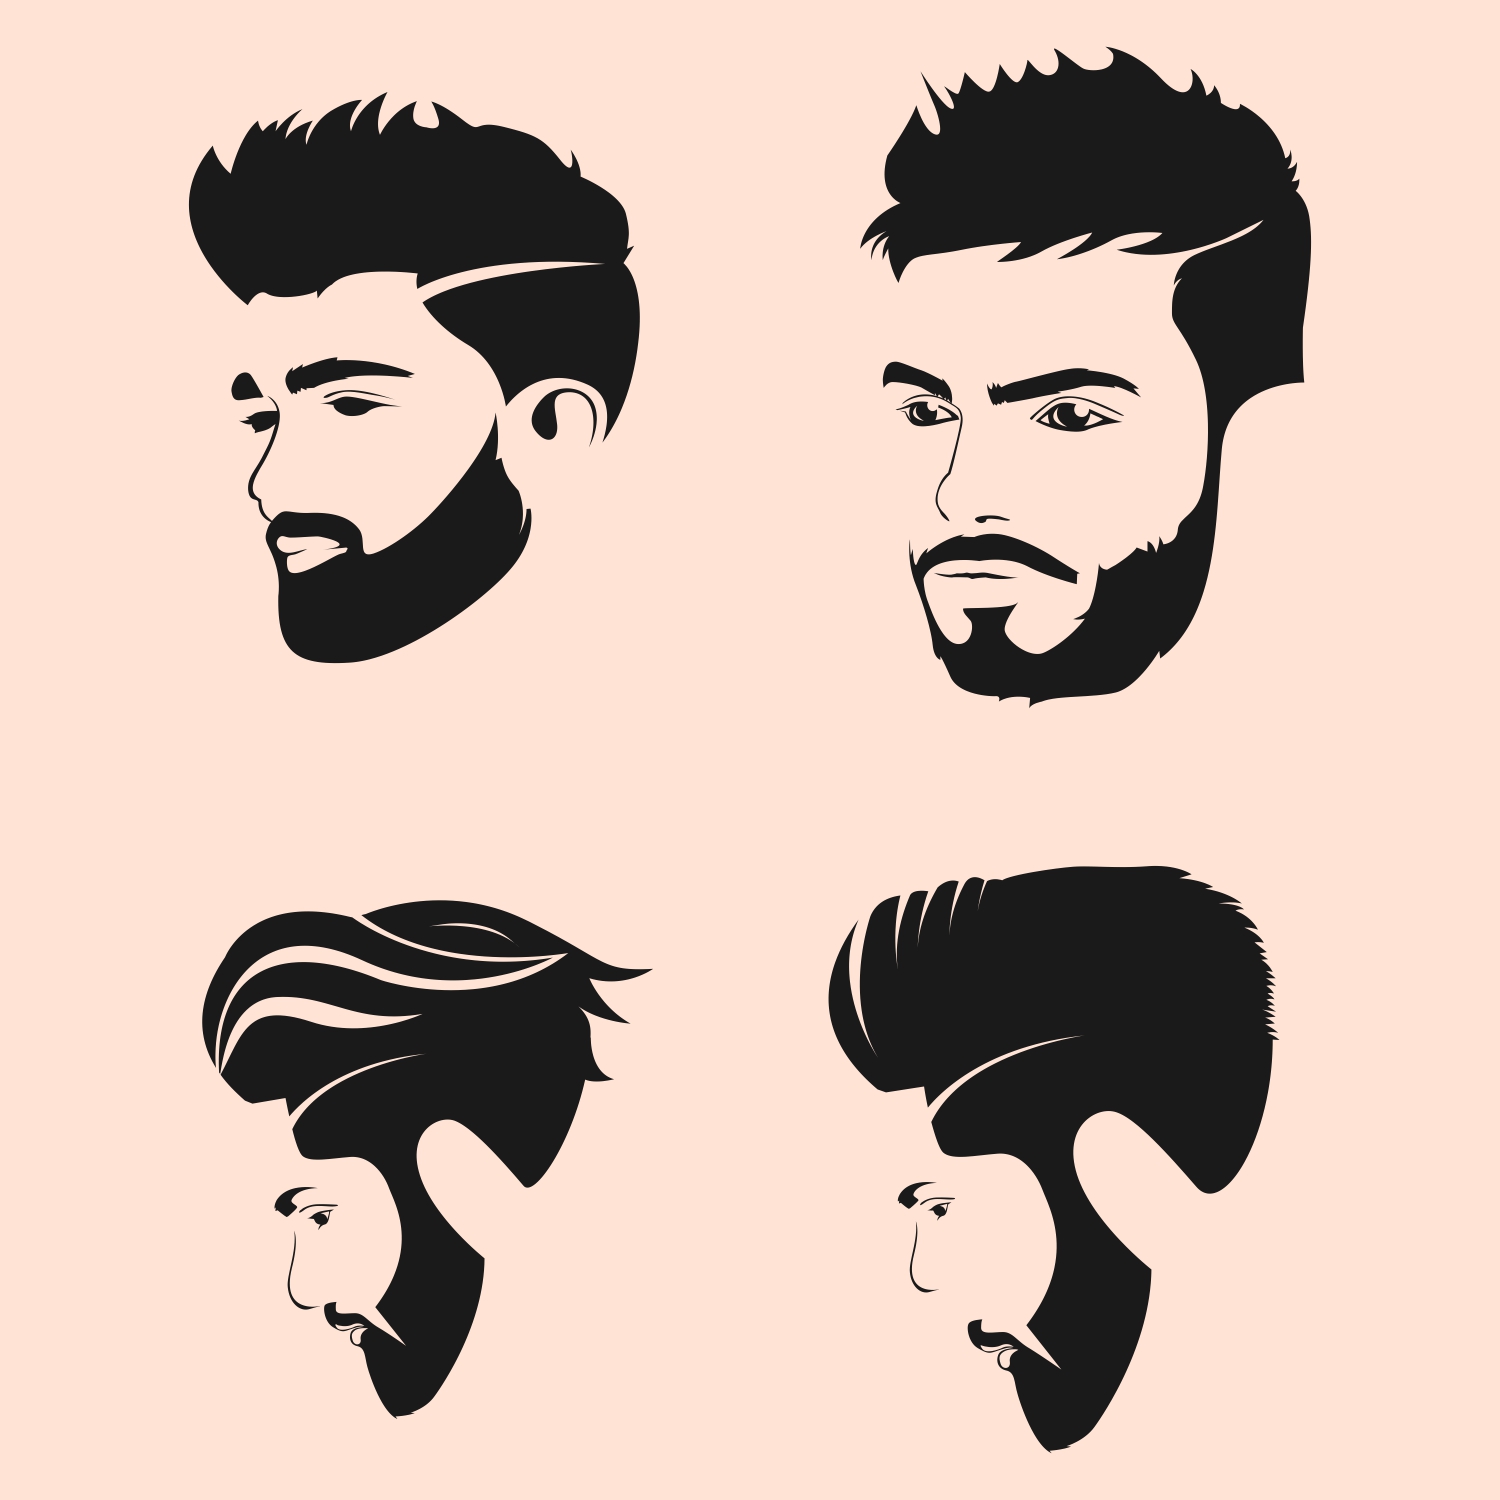 Free vector beard and hairstyle set designs CDR file download for free